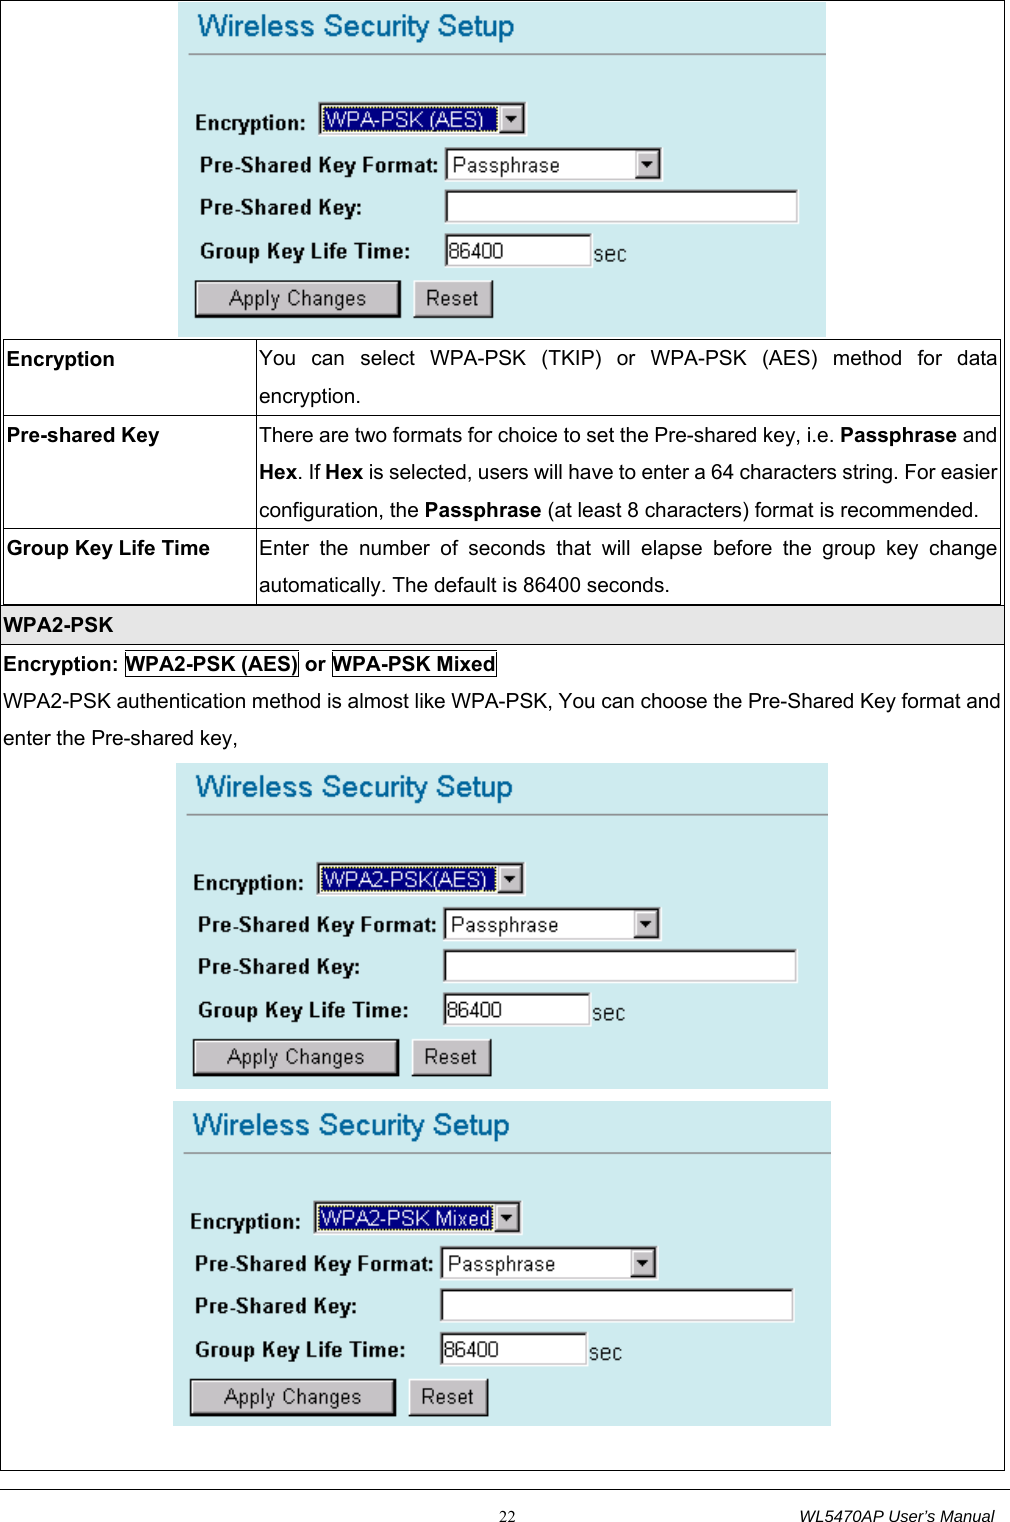                                                           22                                  WL5470AP User’s Manual  Encryption  You can select WPA-PSK (TKIP) or WPA-PSK (AES) method for data encryption. Pre-shared Key  There are two formats for choice to set the Pre-shared key, i.e. Passphrase and Hex. If Hex is selected, users will have to enter a 64 characters string. For easier configuration, the Passphrase (at least 8 characters) format is recommended. Group Key Life Time  Enter the number of seconds that will elapse before the group key change automatically. The default is 86400 seconds.  WPA2-PSK Encryption: WPA2-PSK (AES) or WPA-PSK Mixed WPA2-PSK authentication method is almost like WPA-PSK, You can choose the Pre-Shared Key format and enter the Pre-shared key,    